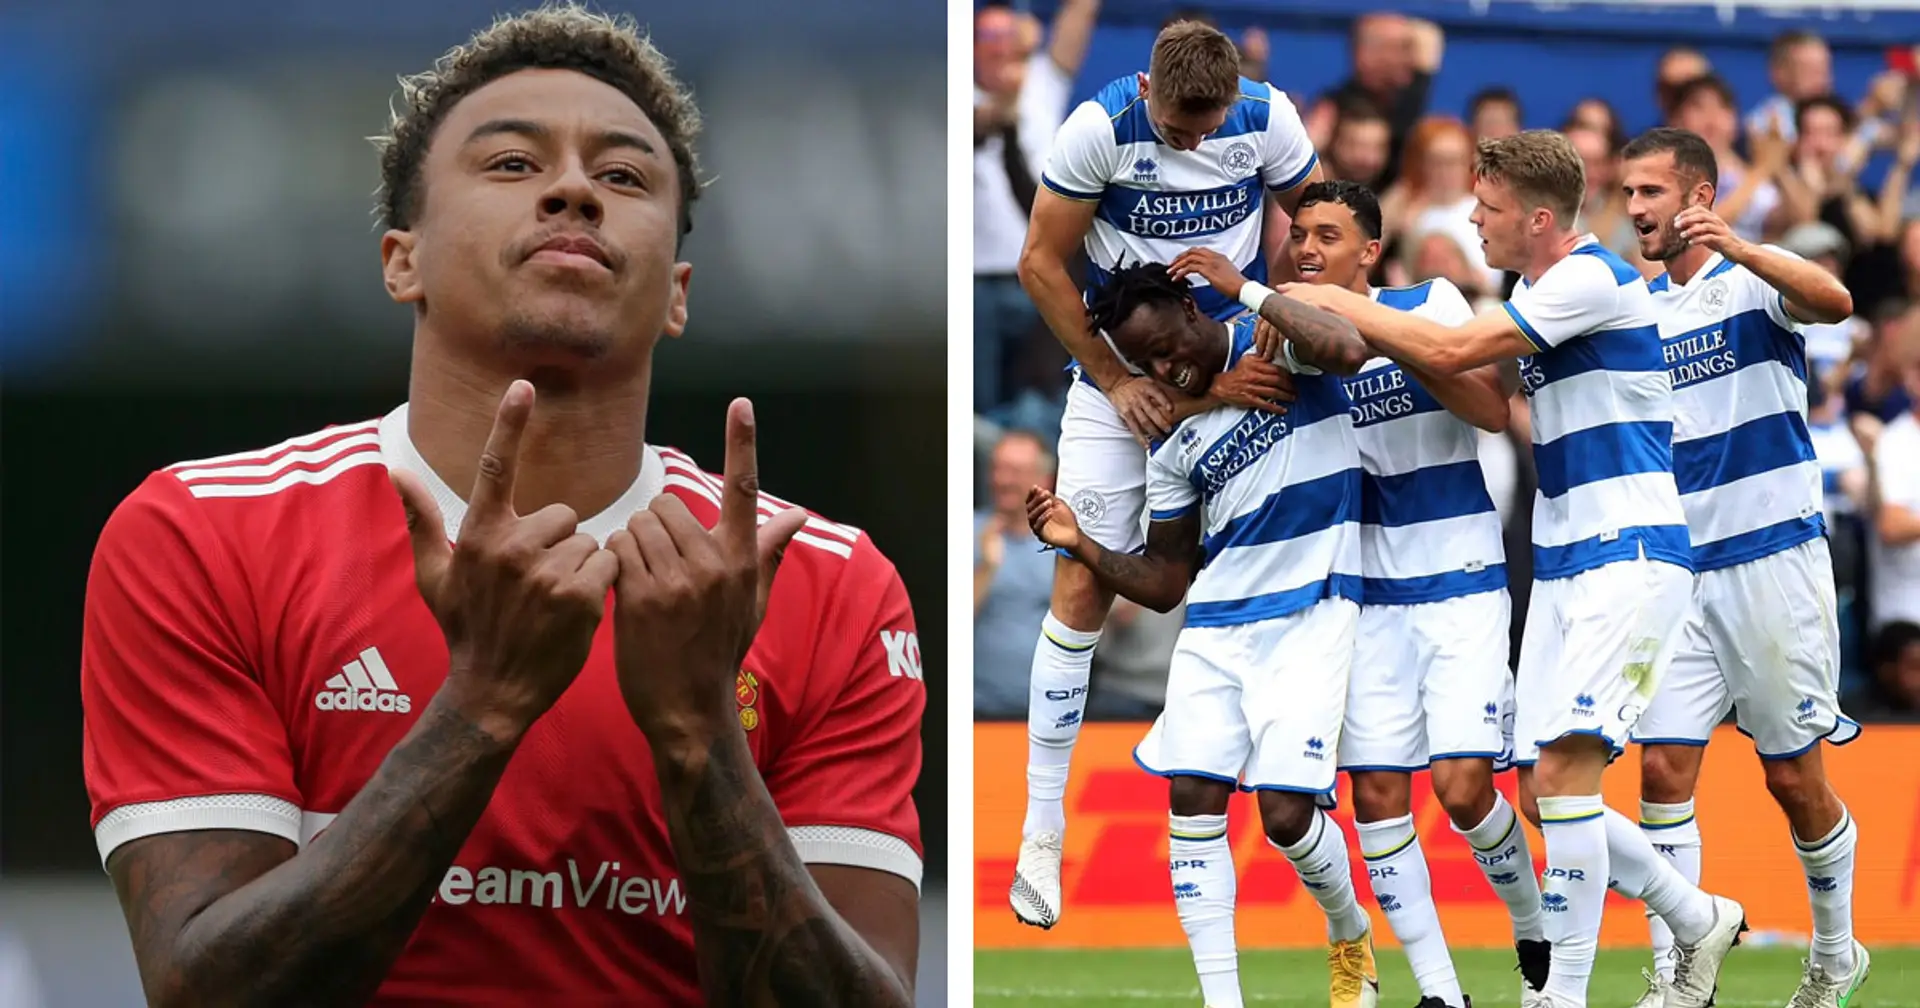 Lingard 7.5, Williams 3.0: rating United players in QPR loss